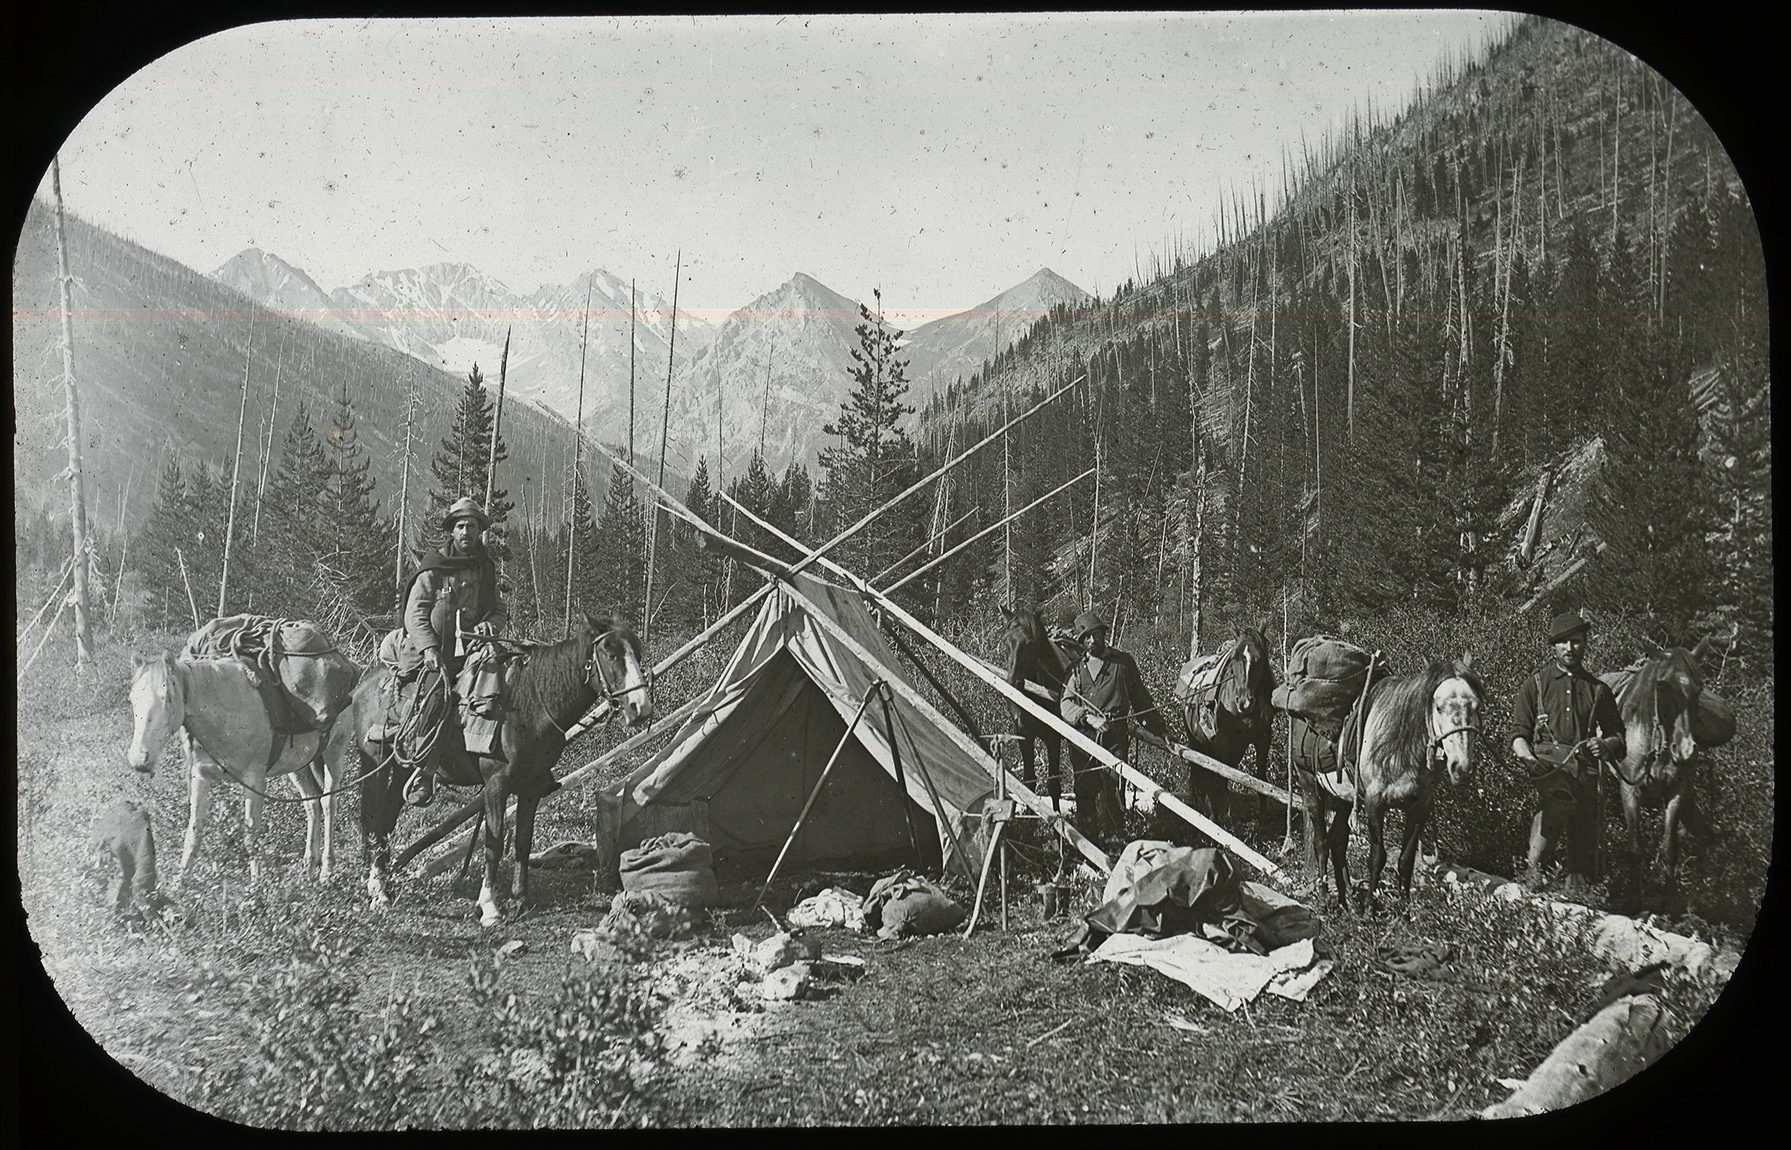 Camp in the Canadian Rockies